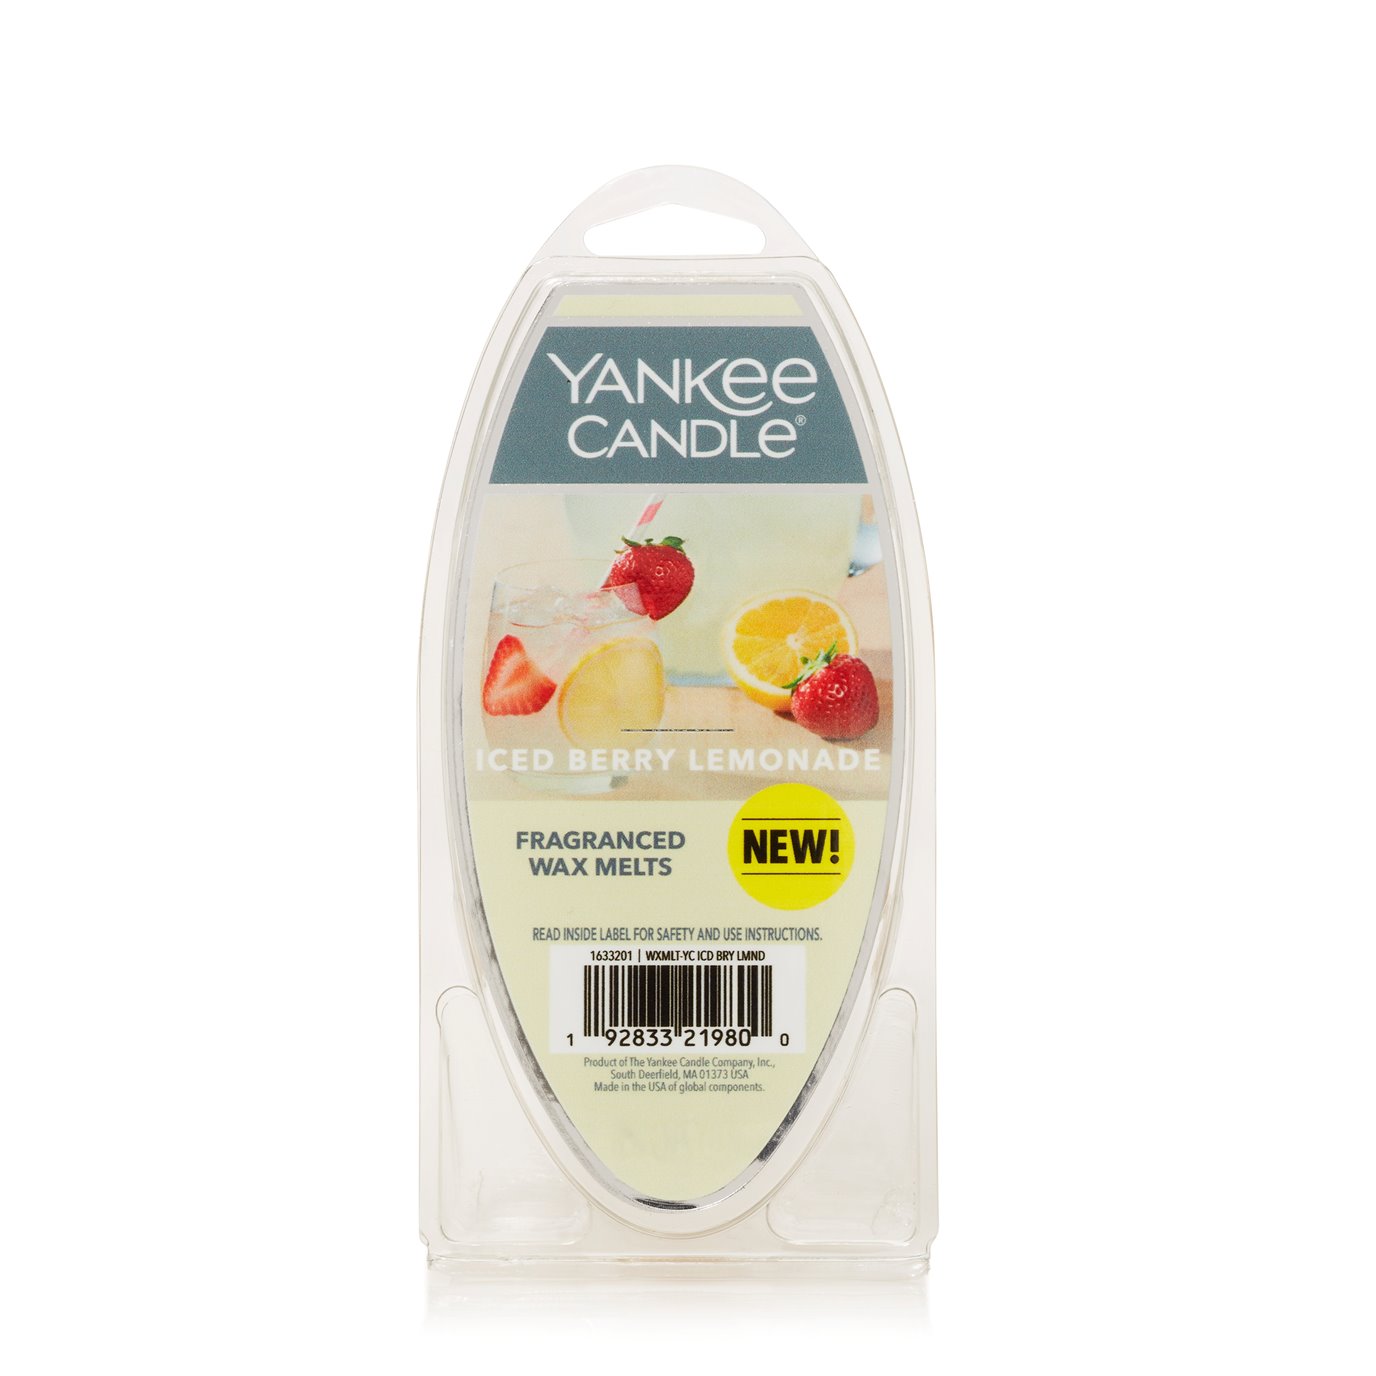 Yankee Candle Iced Berry Lemonade Wax Melts 6-Pack